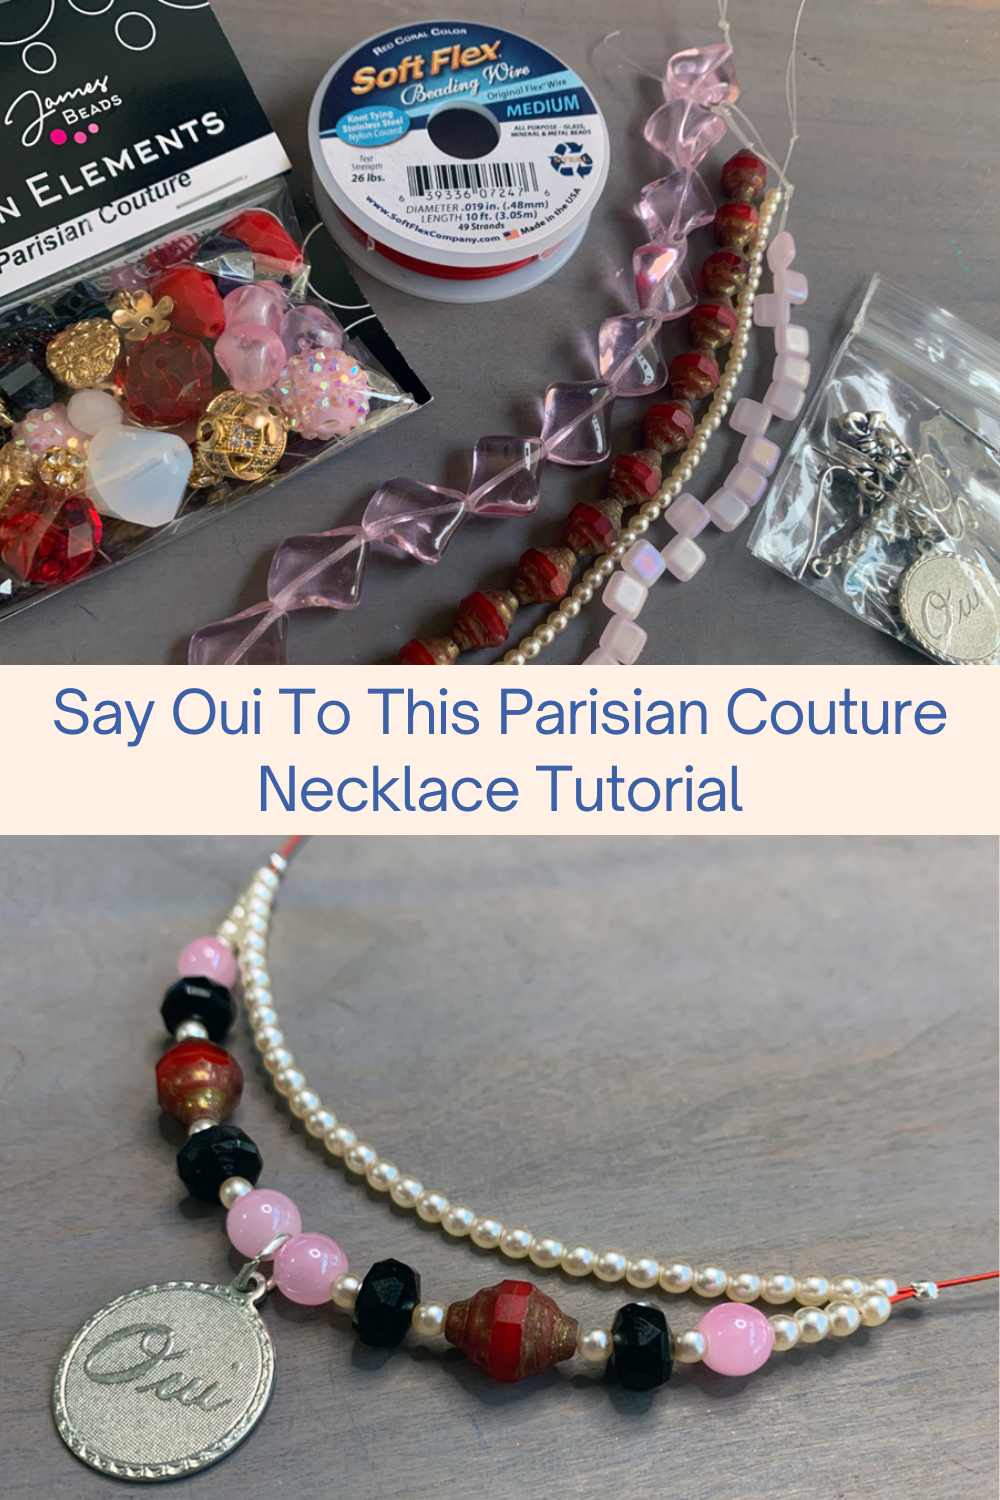 Say Oui To This Parisian Couture Necklace Tutorial Collage